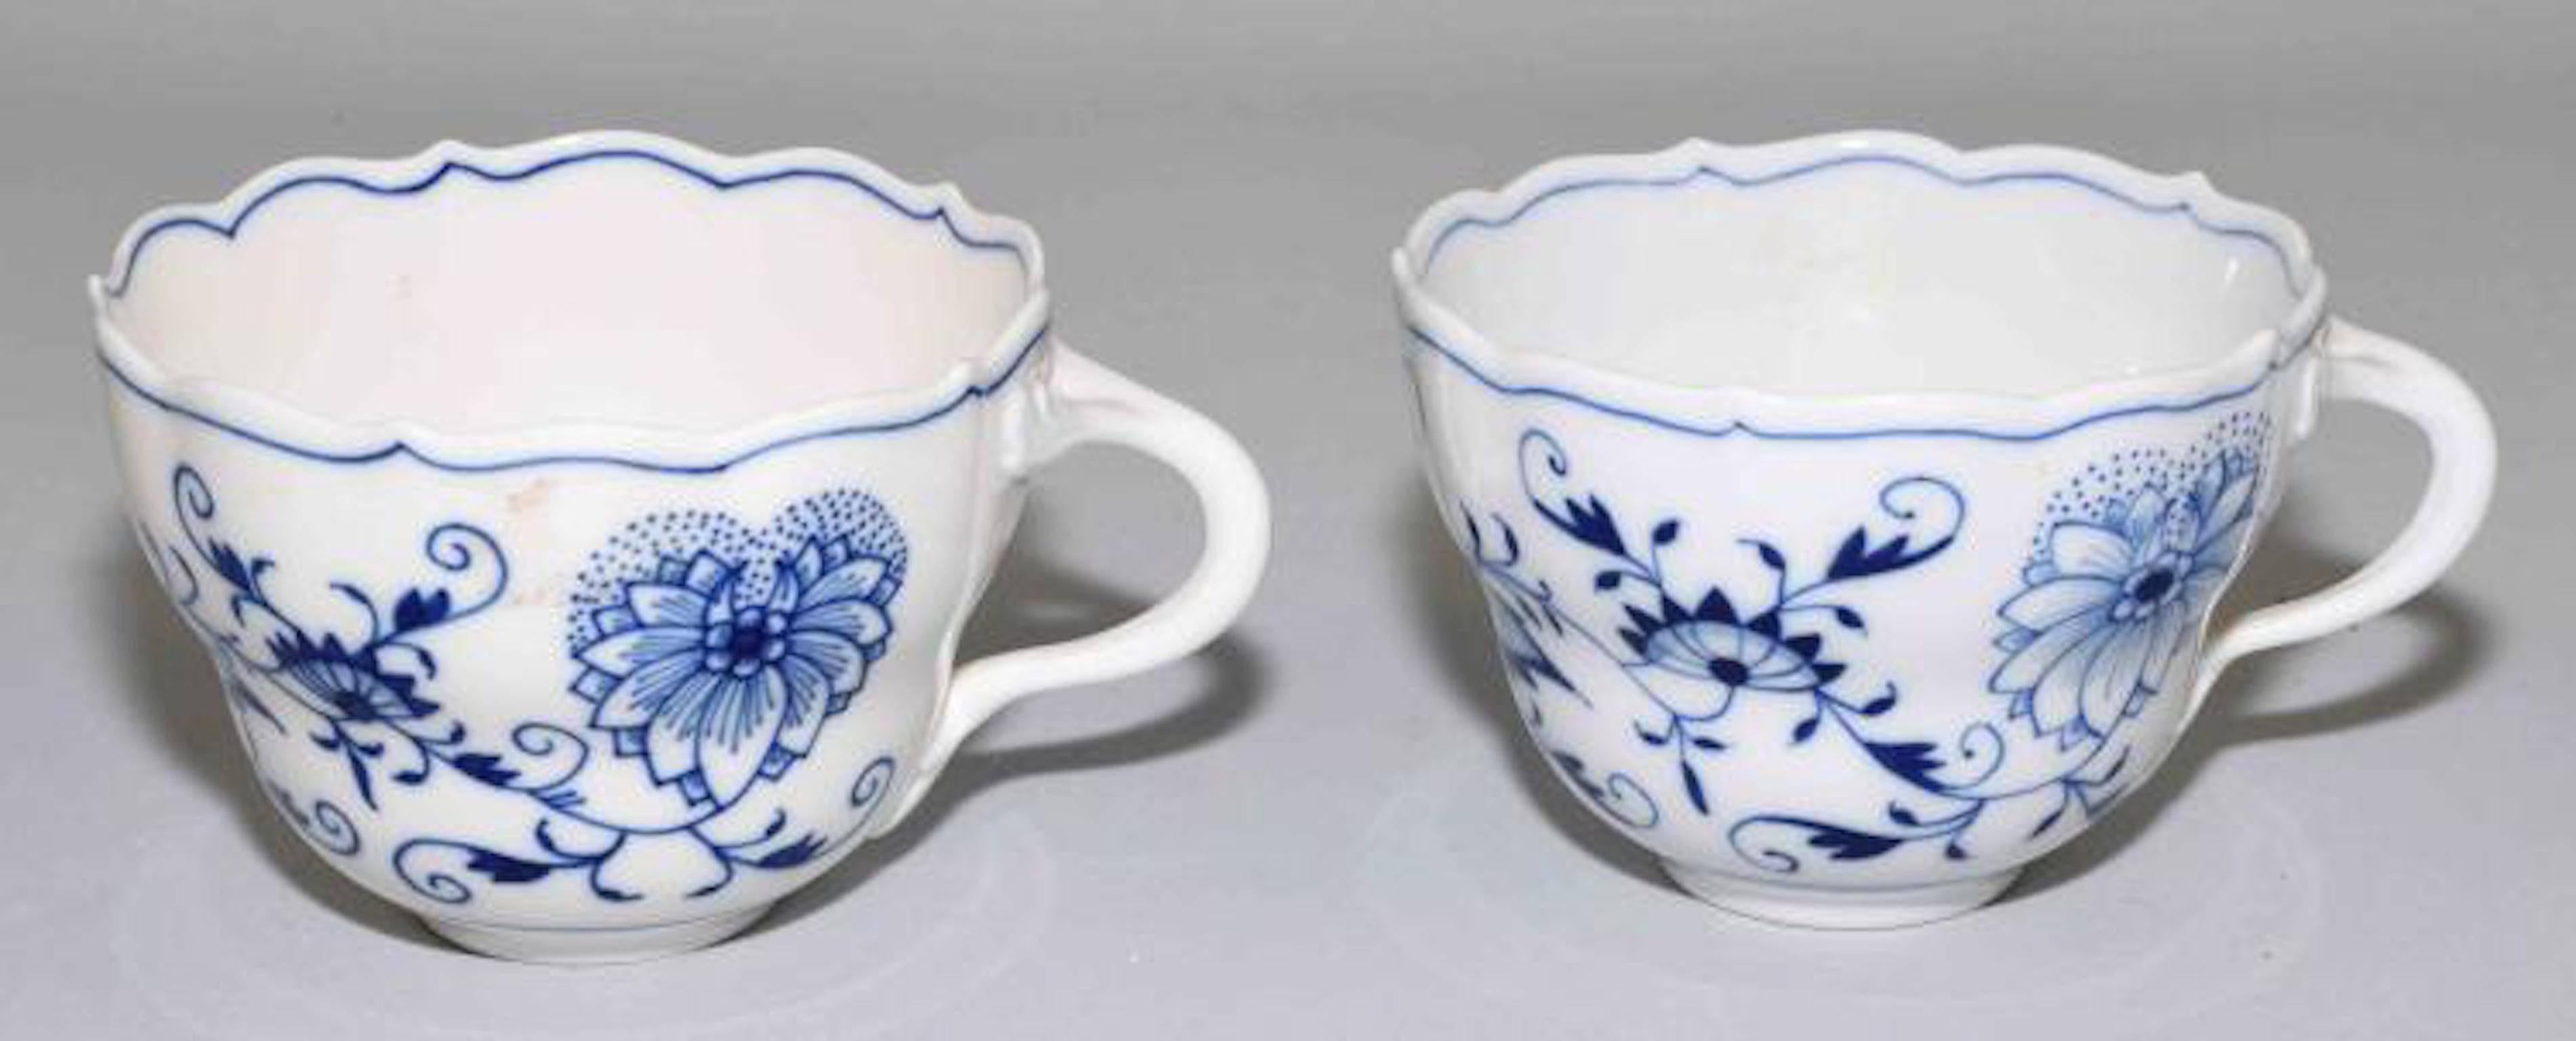 German Meissen Porcelain Blue Onion Cups and Saucers, Set of Two For Sale